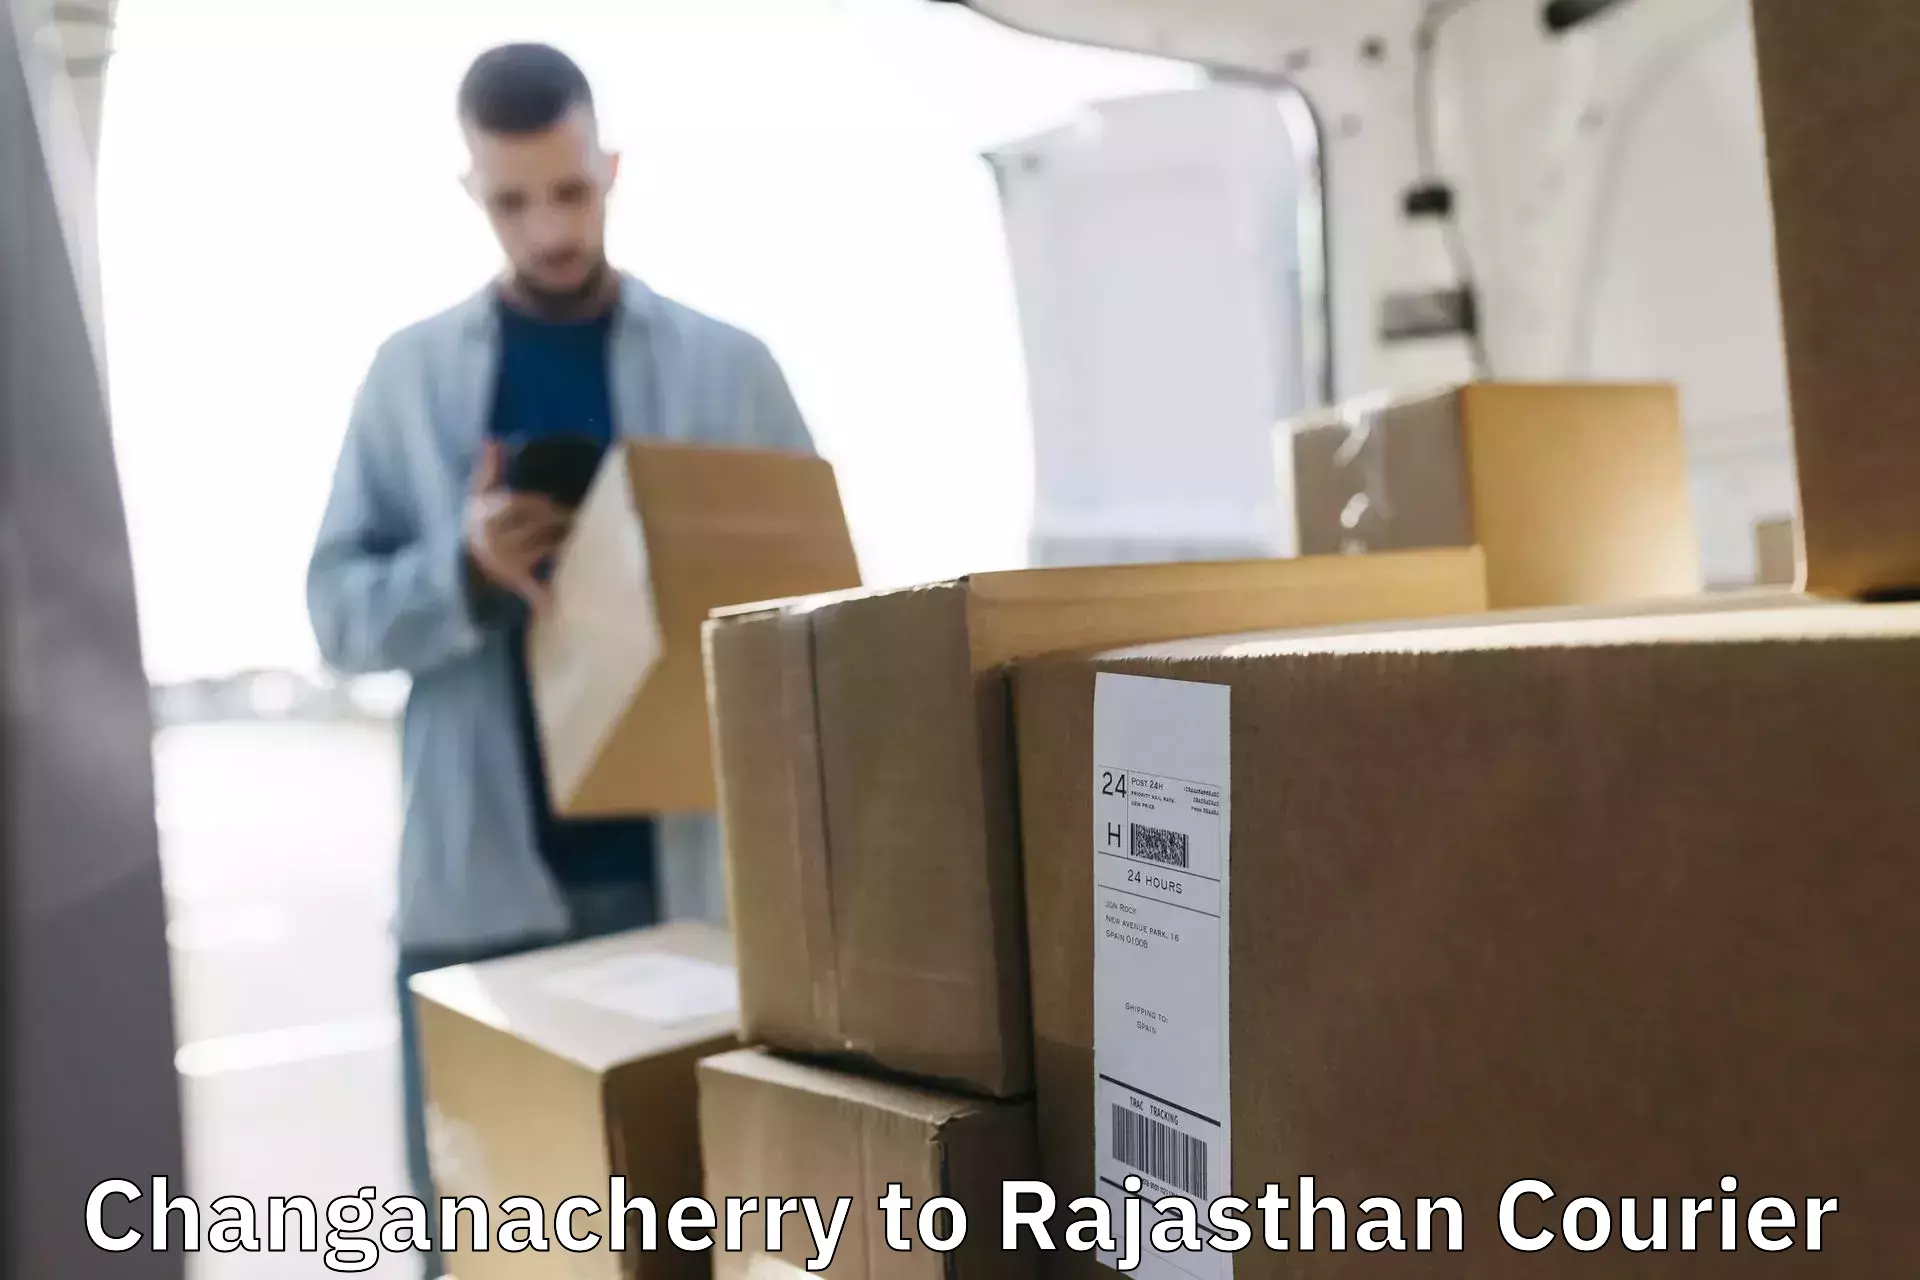 Courier service innovation Changanacherry to Mathania